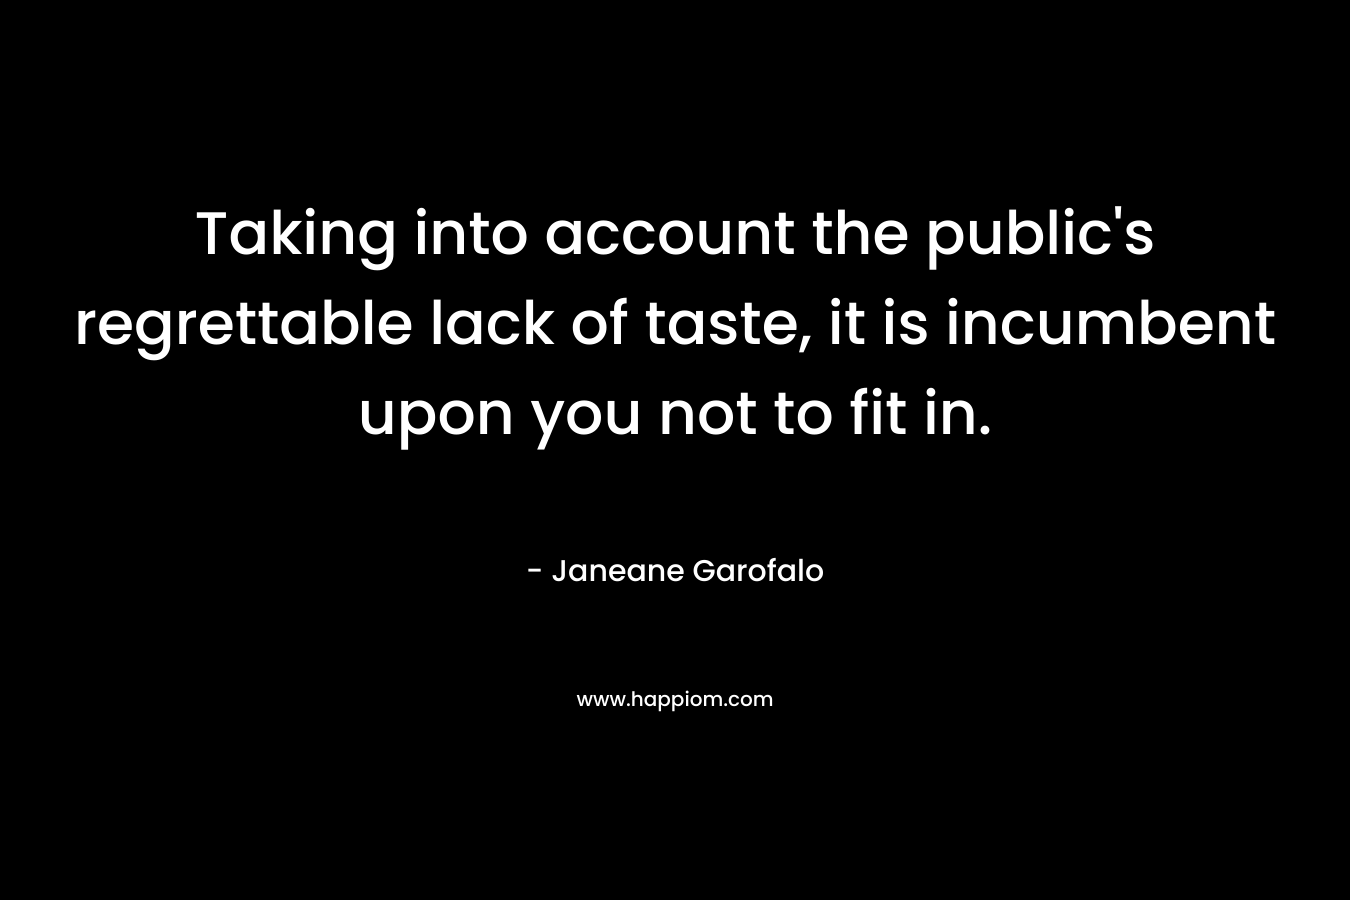 Taking into account the public's regrettable lack of taste, it is incumbent upon you not to fit in.